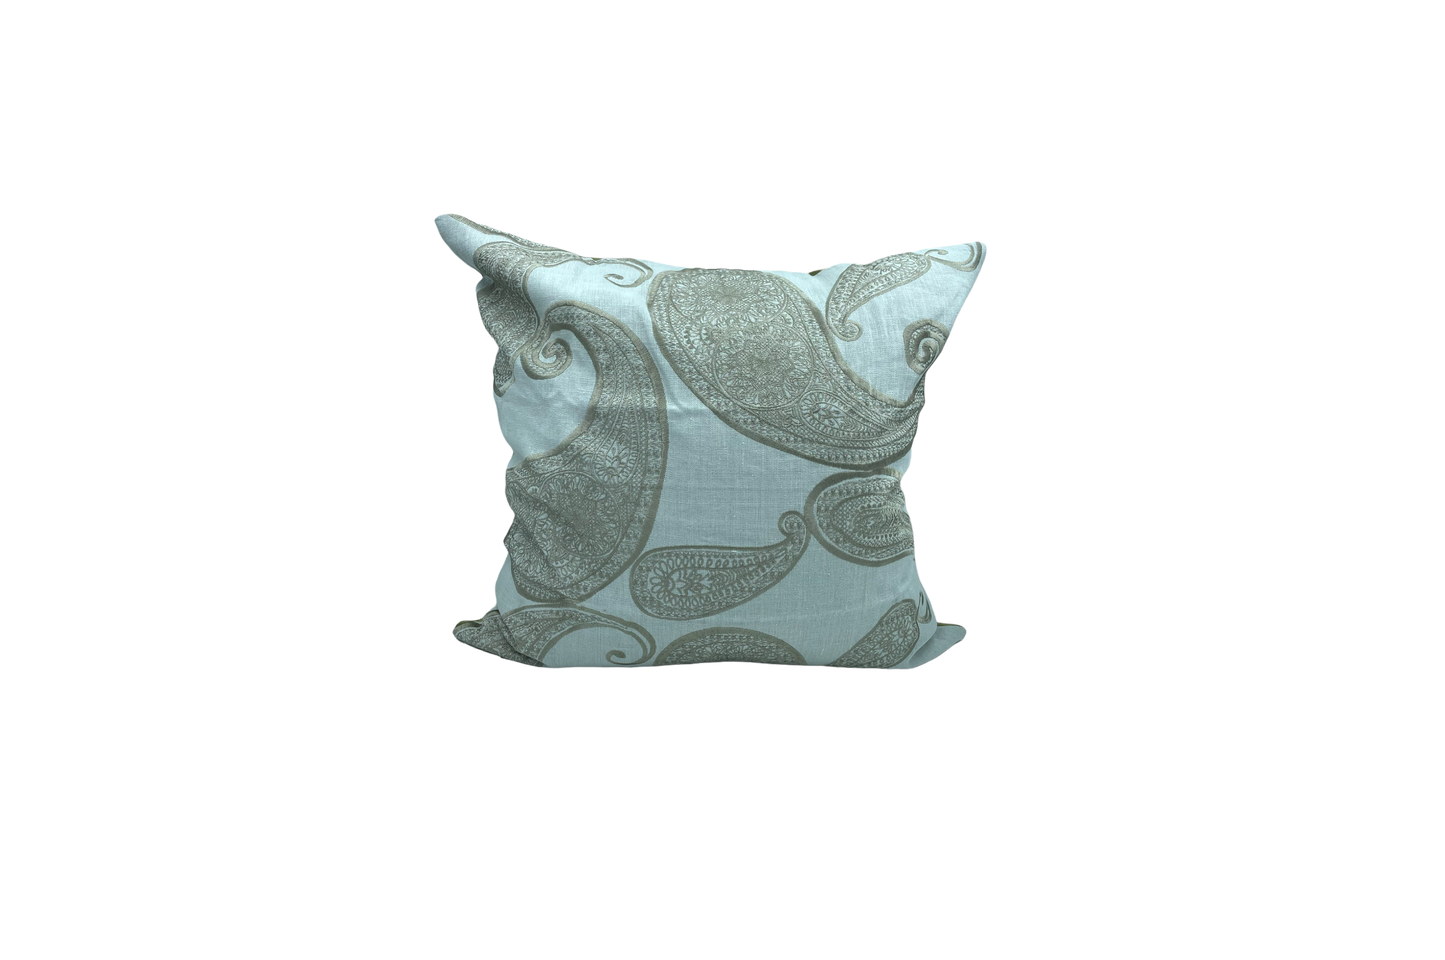 Light Silver Paisley - Sustainable Décor Pillows